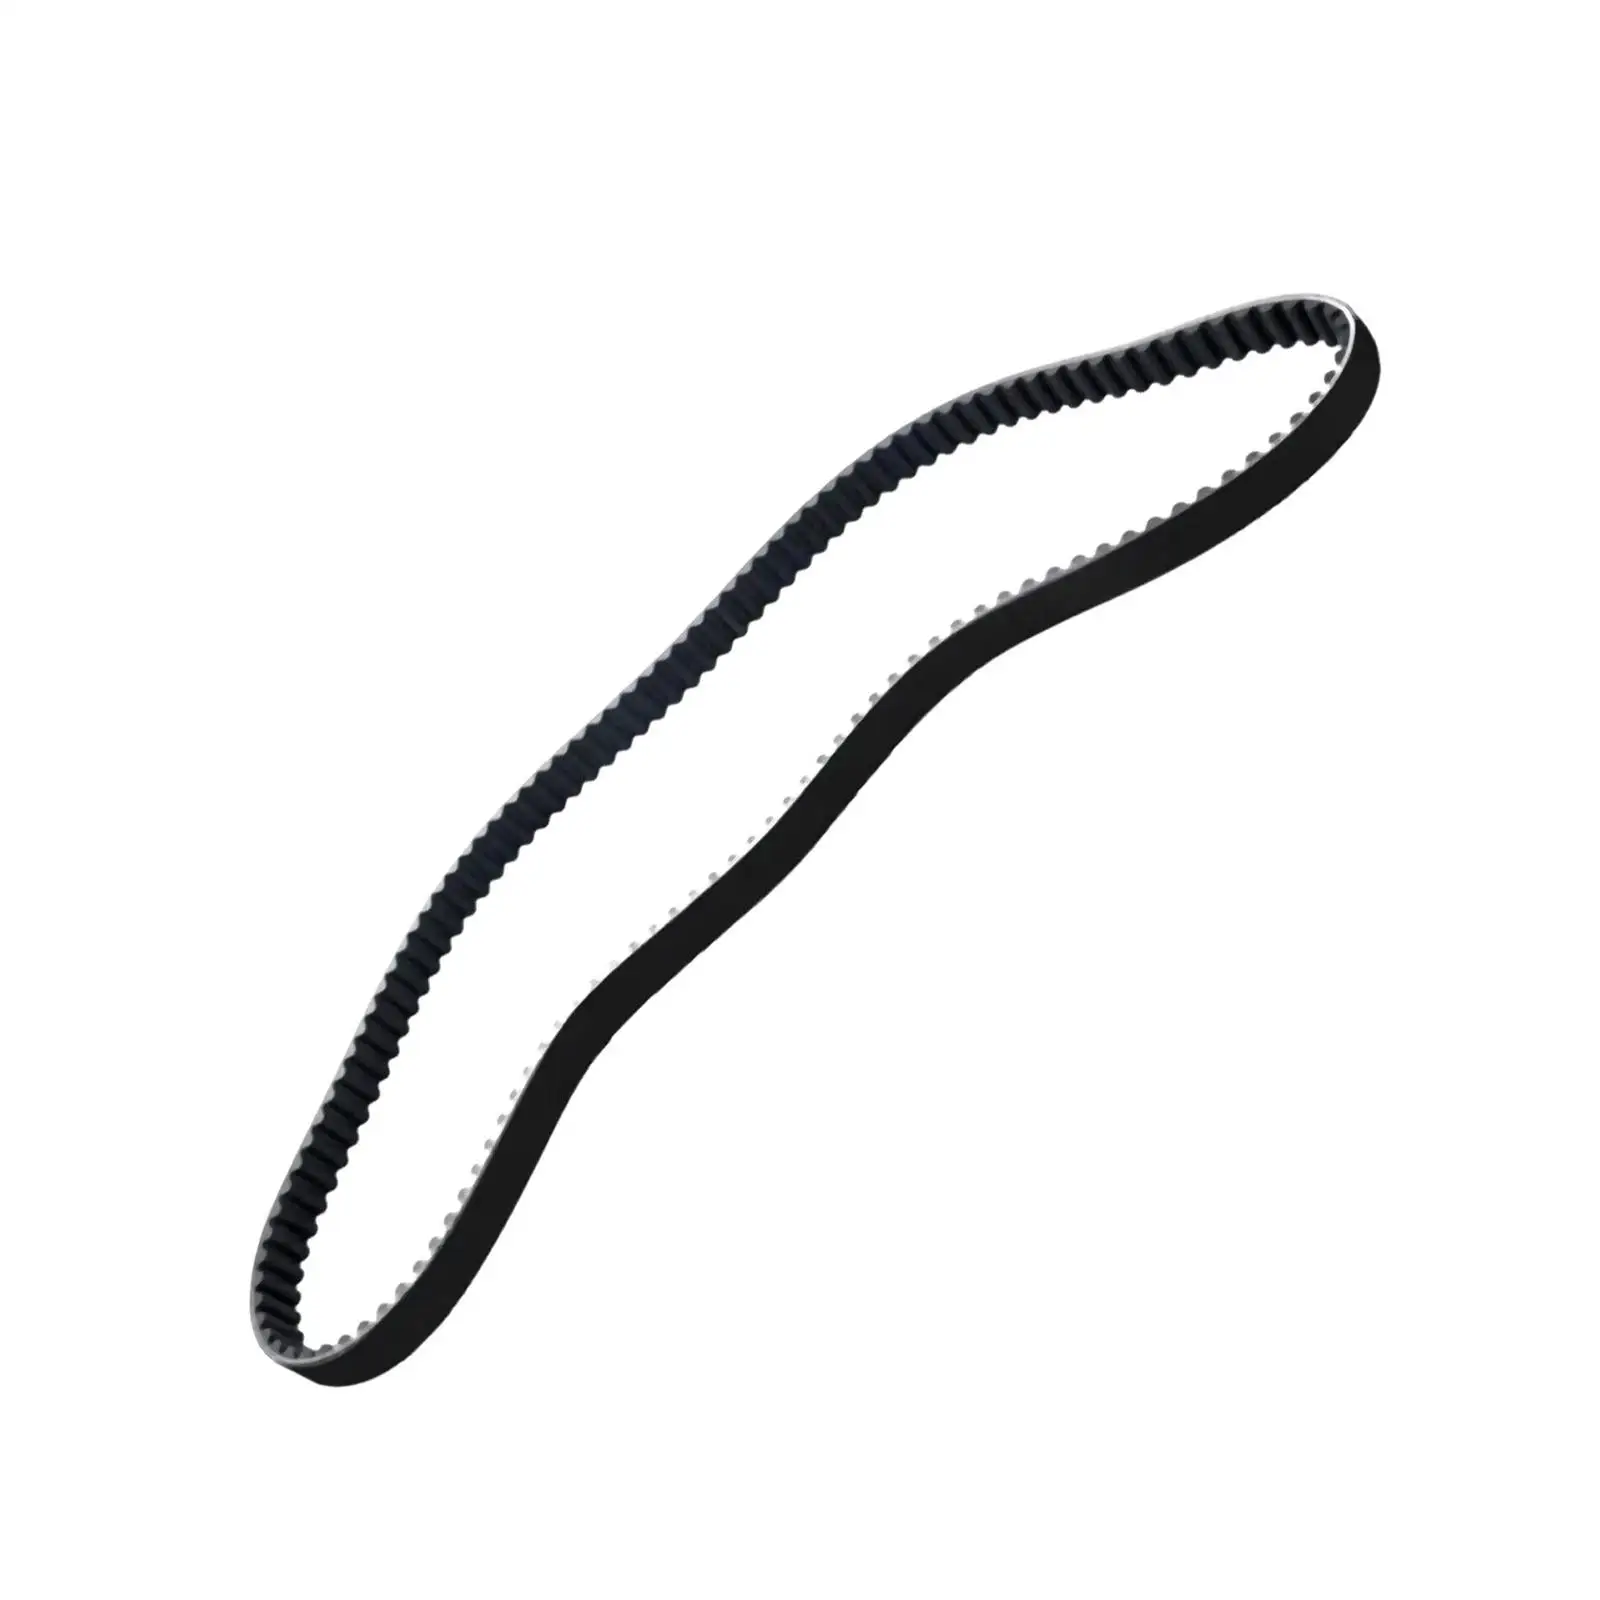 Rear Drive Belt 40001-85 Rubber Direct Replaces for Harley-davidson Touring 1985-1996 High Professional